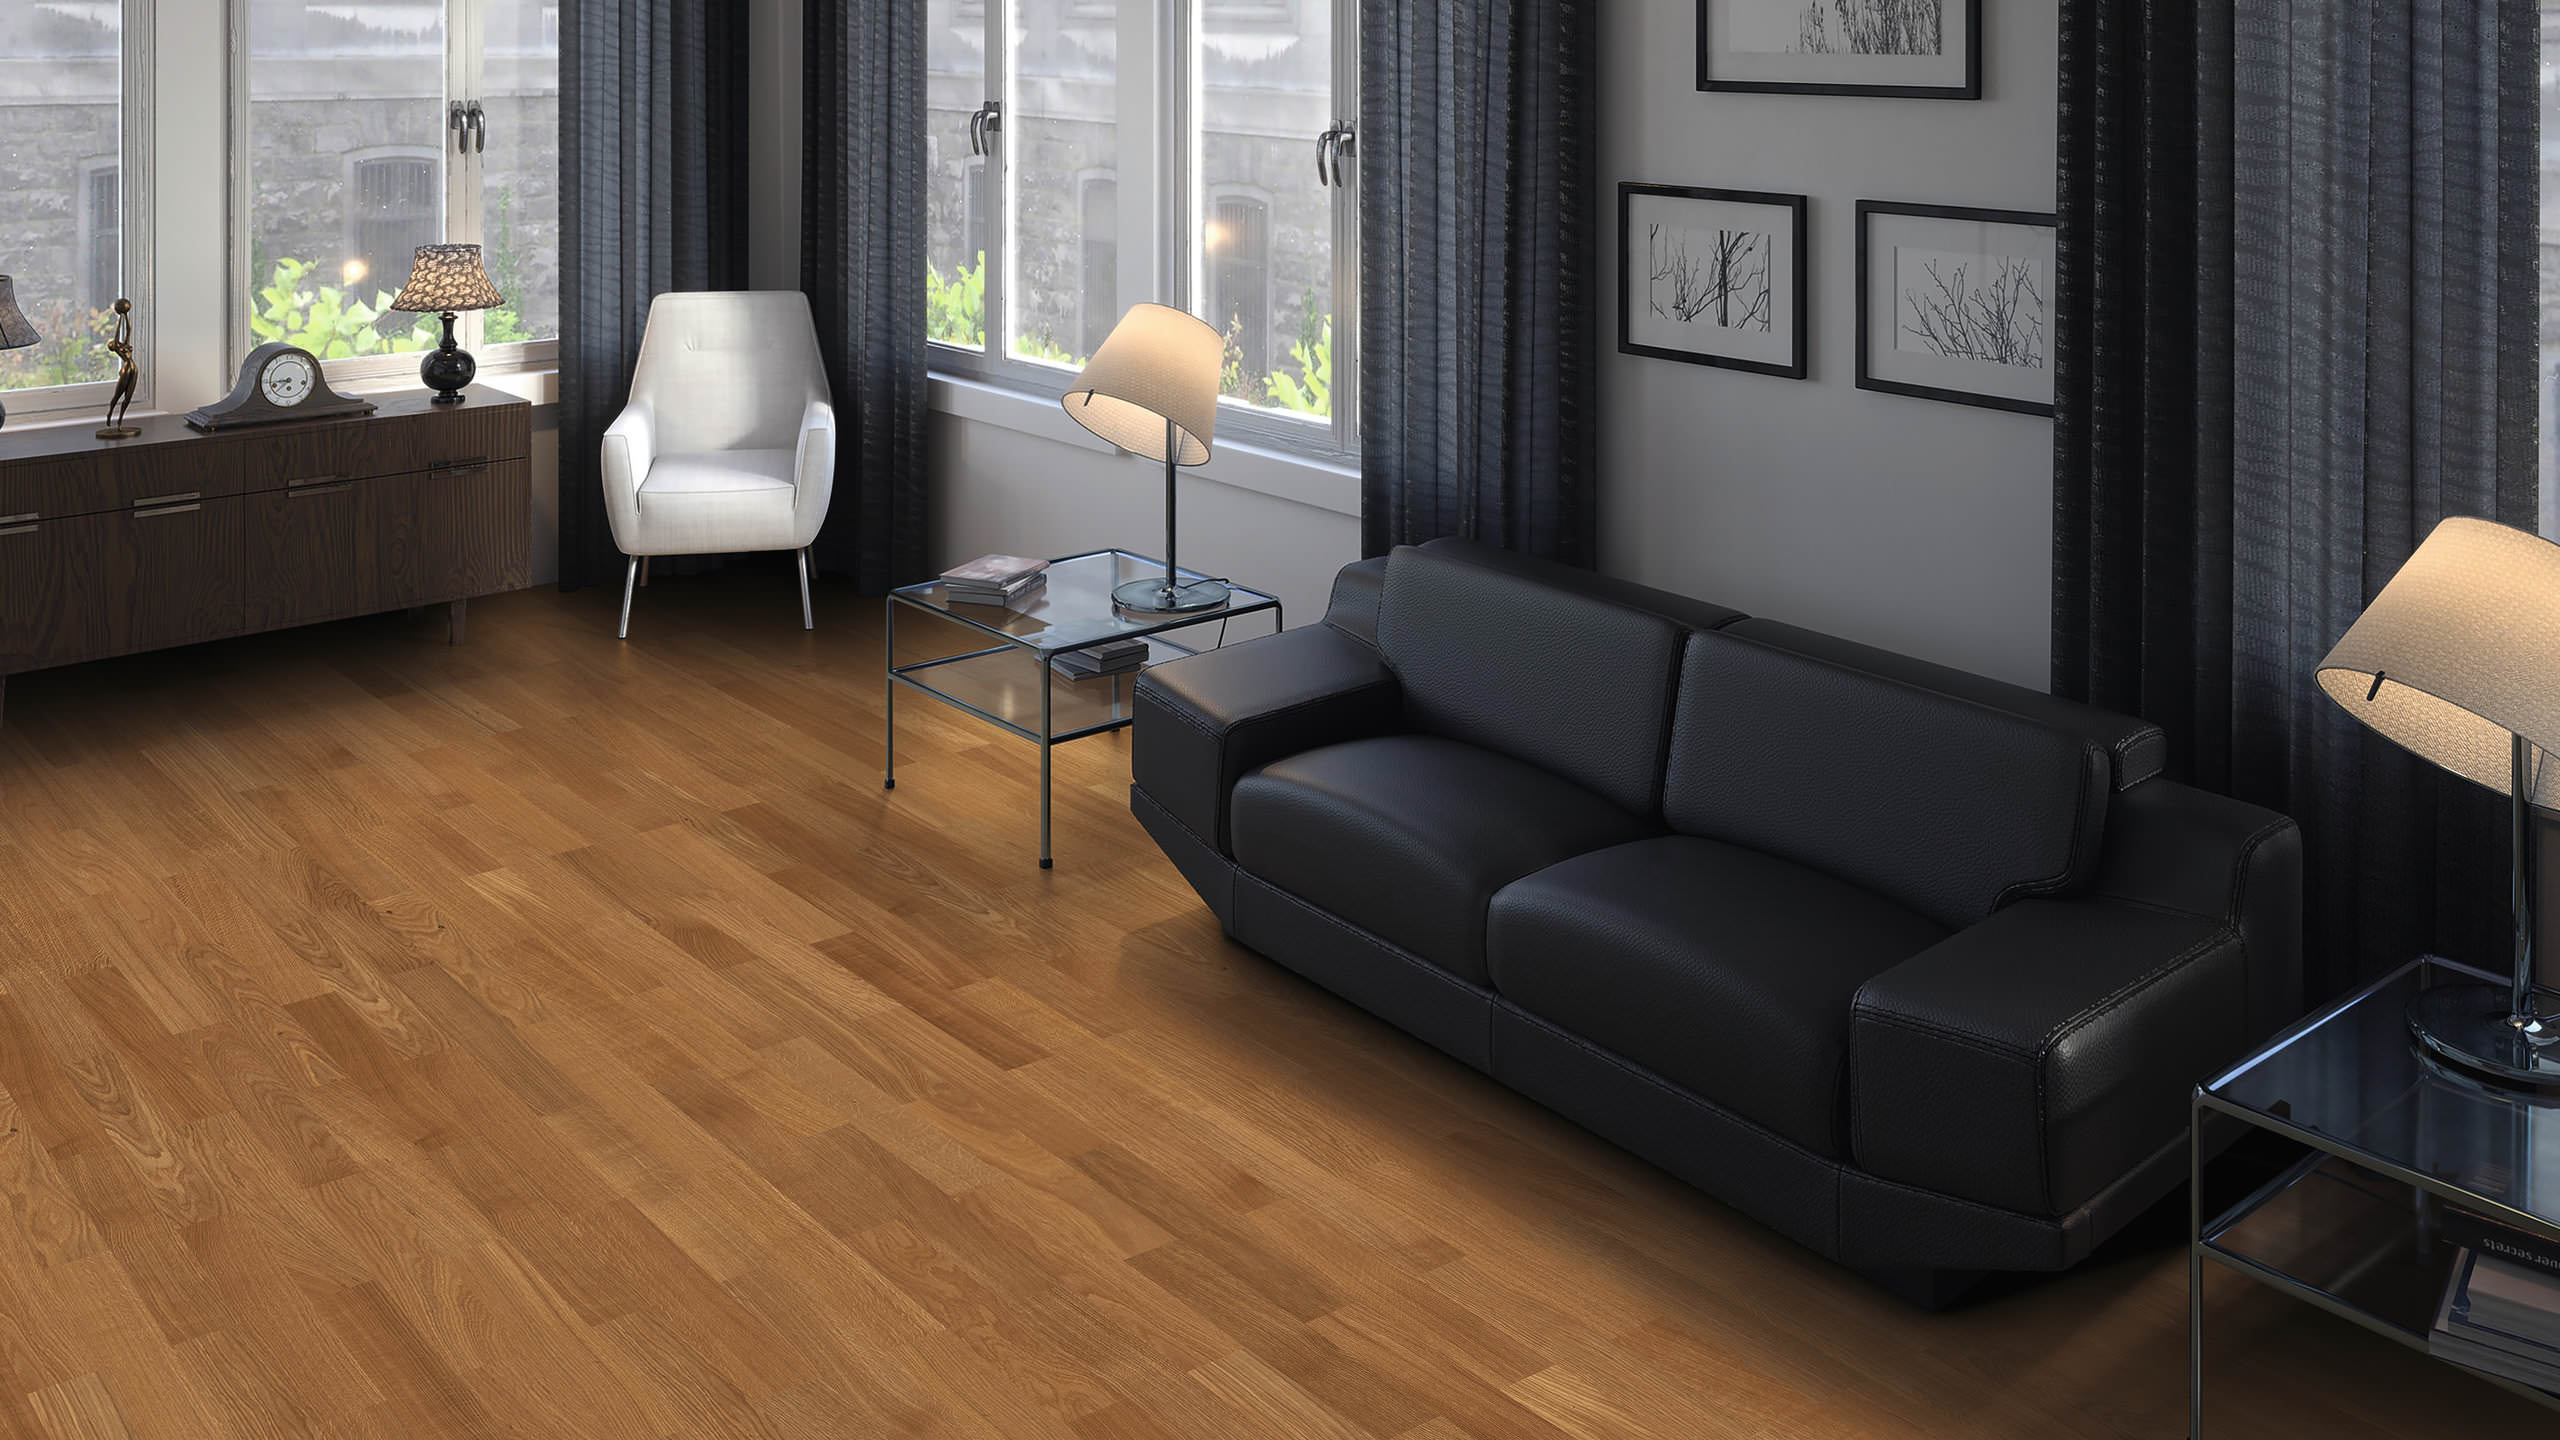 HARO PARQUET 4000 Strip Allegro Oak Trend brushed naturaLin plus Tongue and Groove